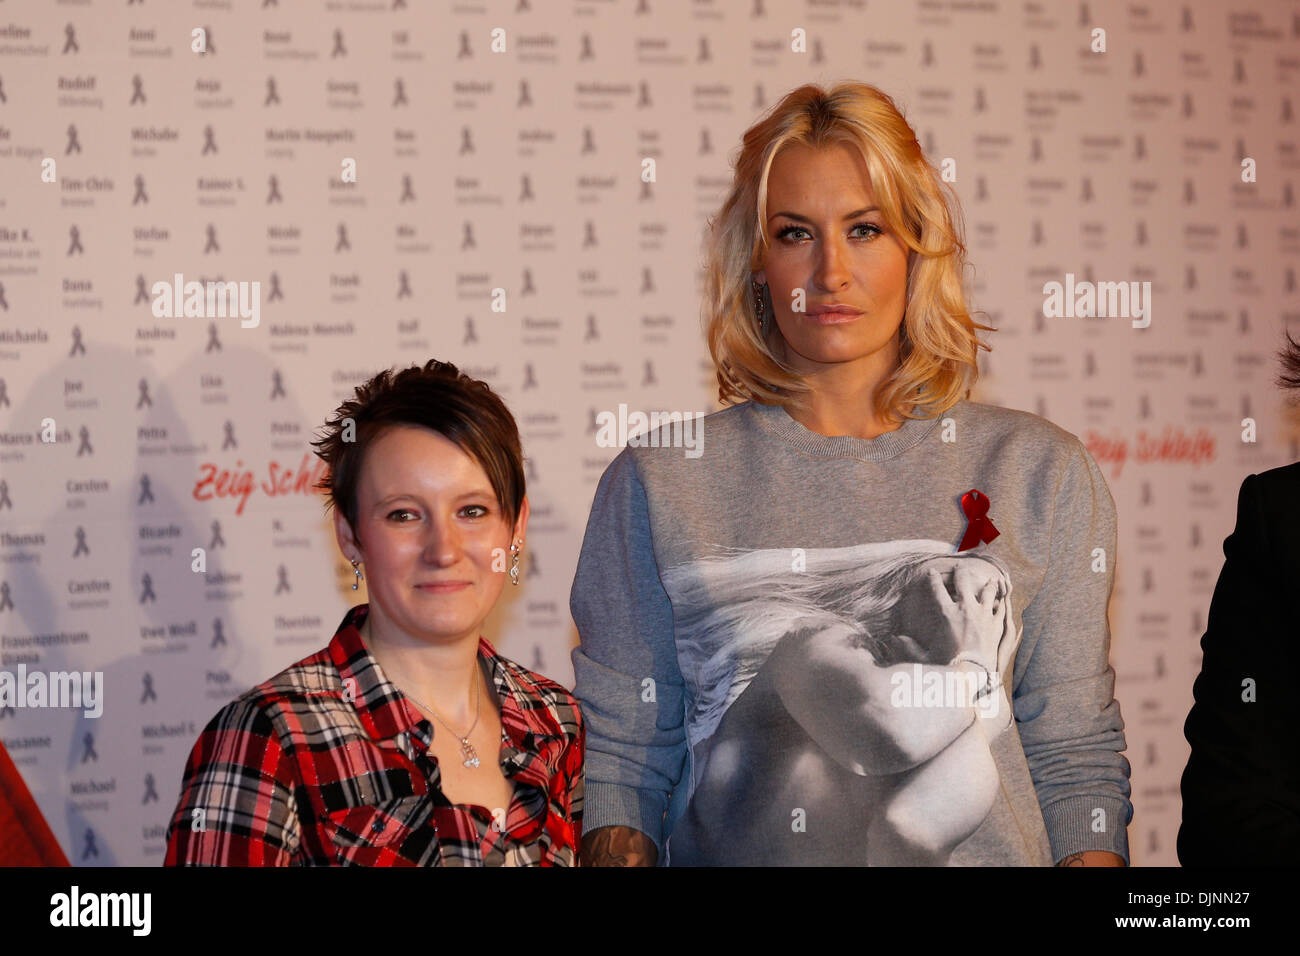 Berlin, Germany. November 29th, 2013. Press conference with German star singer Sarah Connor on 'Live together positively' on the occasion of the World AIDS Day at the admiral palace in Berlin. / Picture: Sarah Connor, Star singer and ambassador of the 'live together positively' and Doreen, HIV-positive ambassador for the action. Credit:  Reynaldo Chaib Paganelli/Alamy Live News Stock Photo